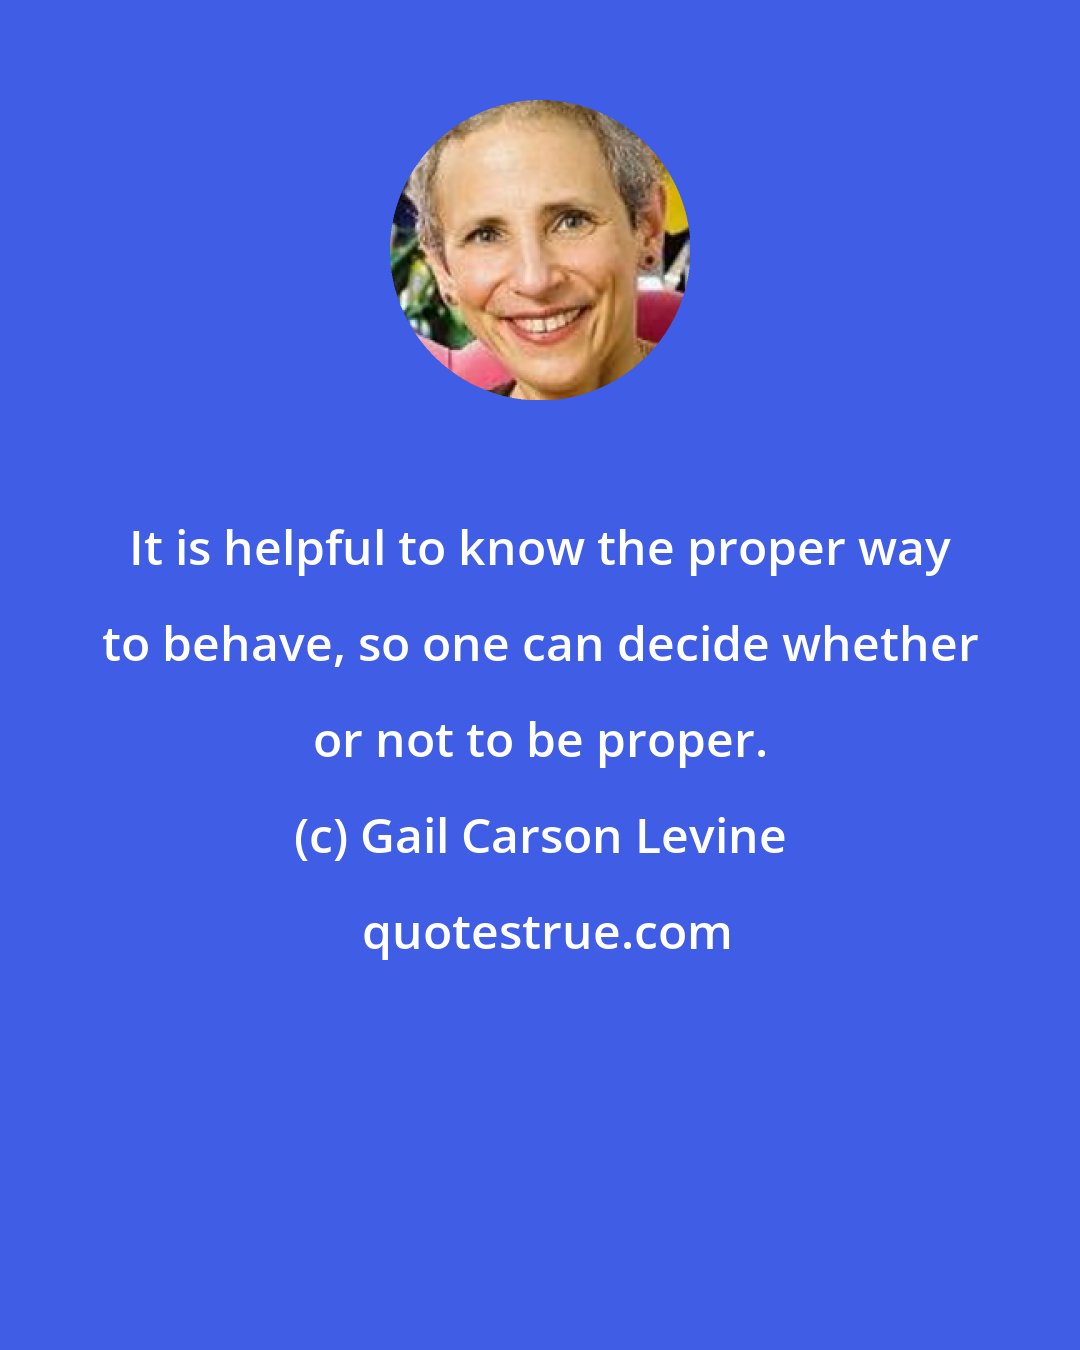 Gail Carson Levine: It is helpful to know the proper way to behave, so one can decide whether or not to be proper.